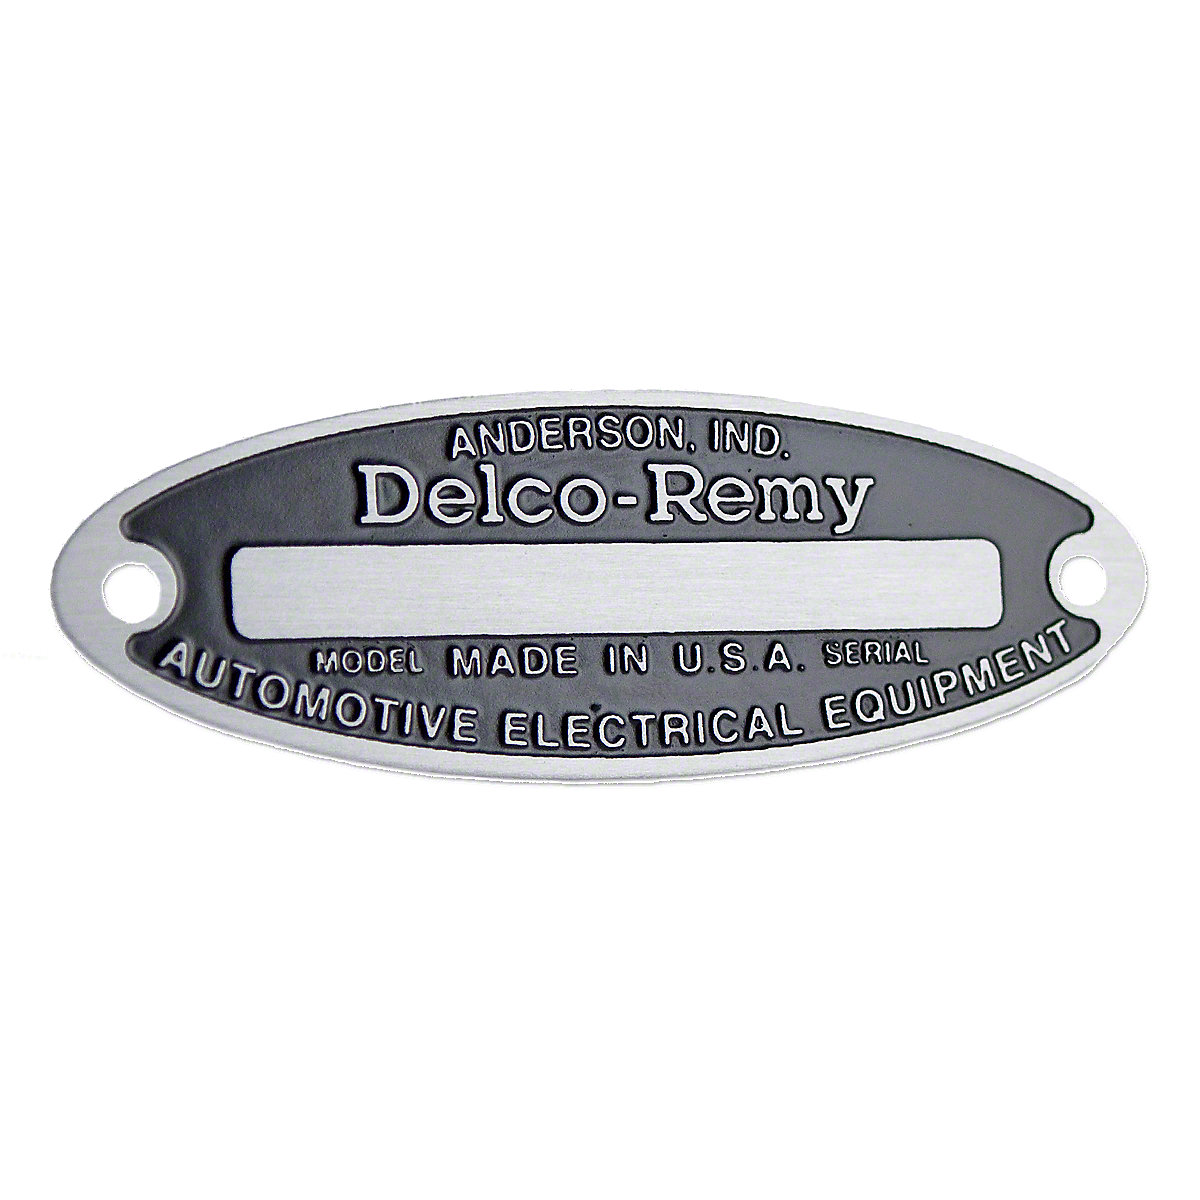 Delco Remy Blank Distributor Tag For Massey Harris And Massey Ferguson Tractors.